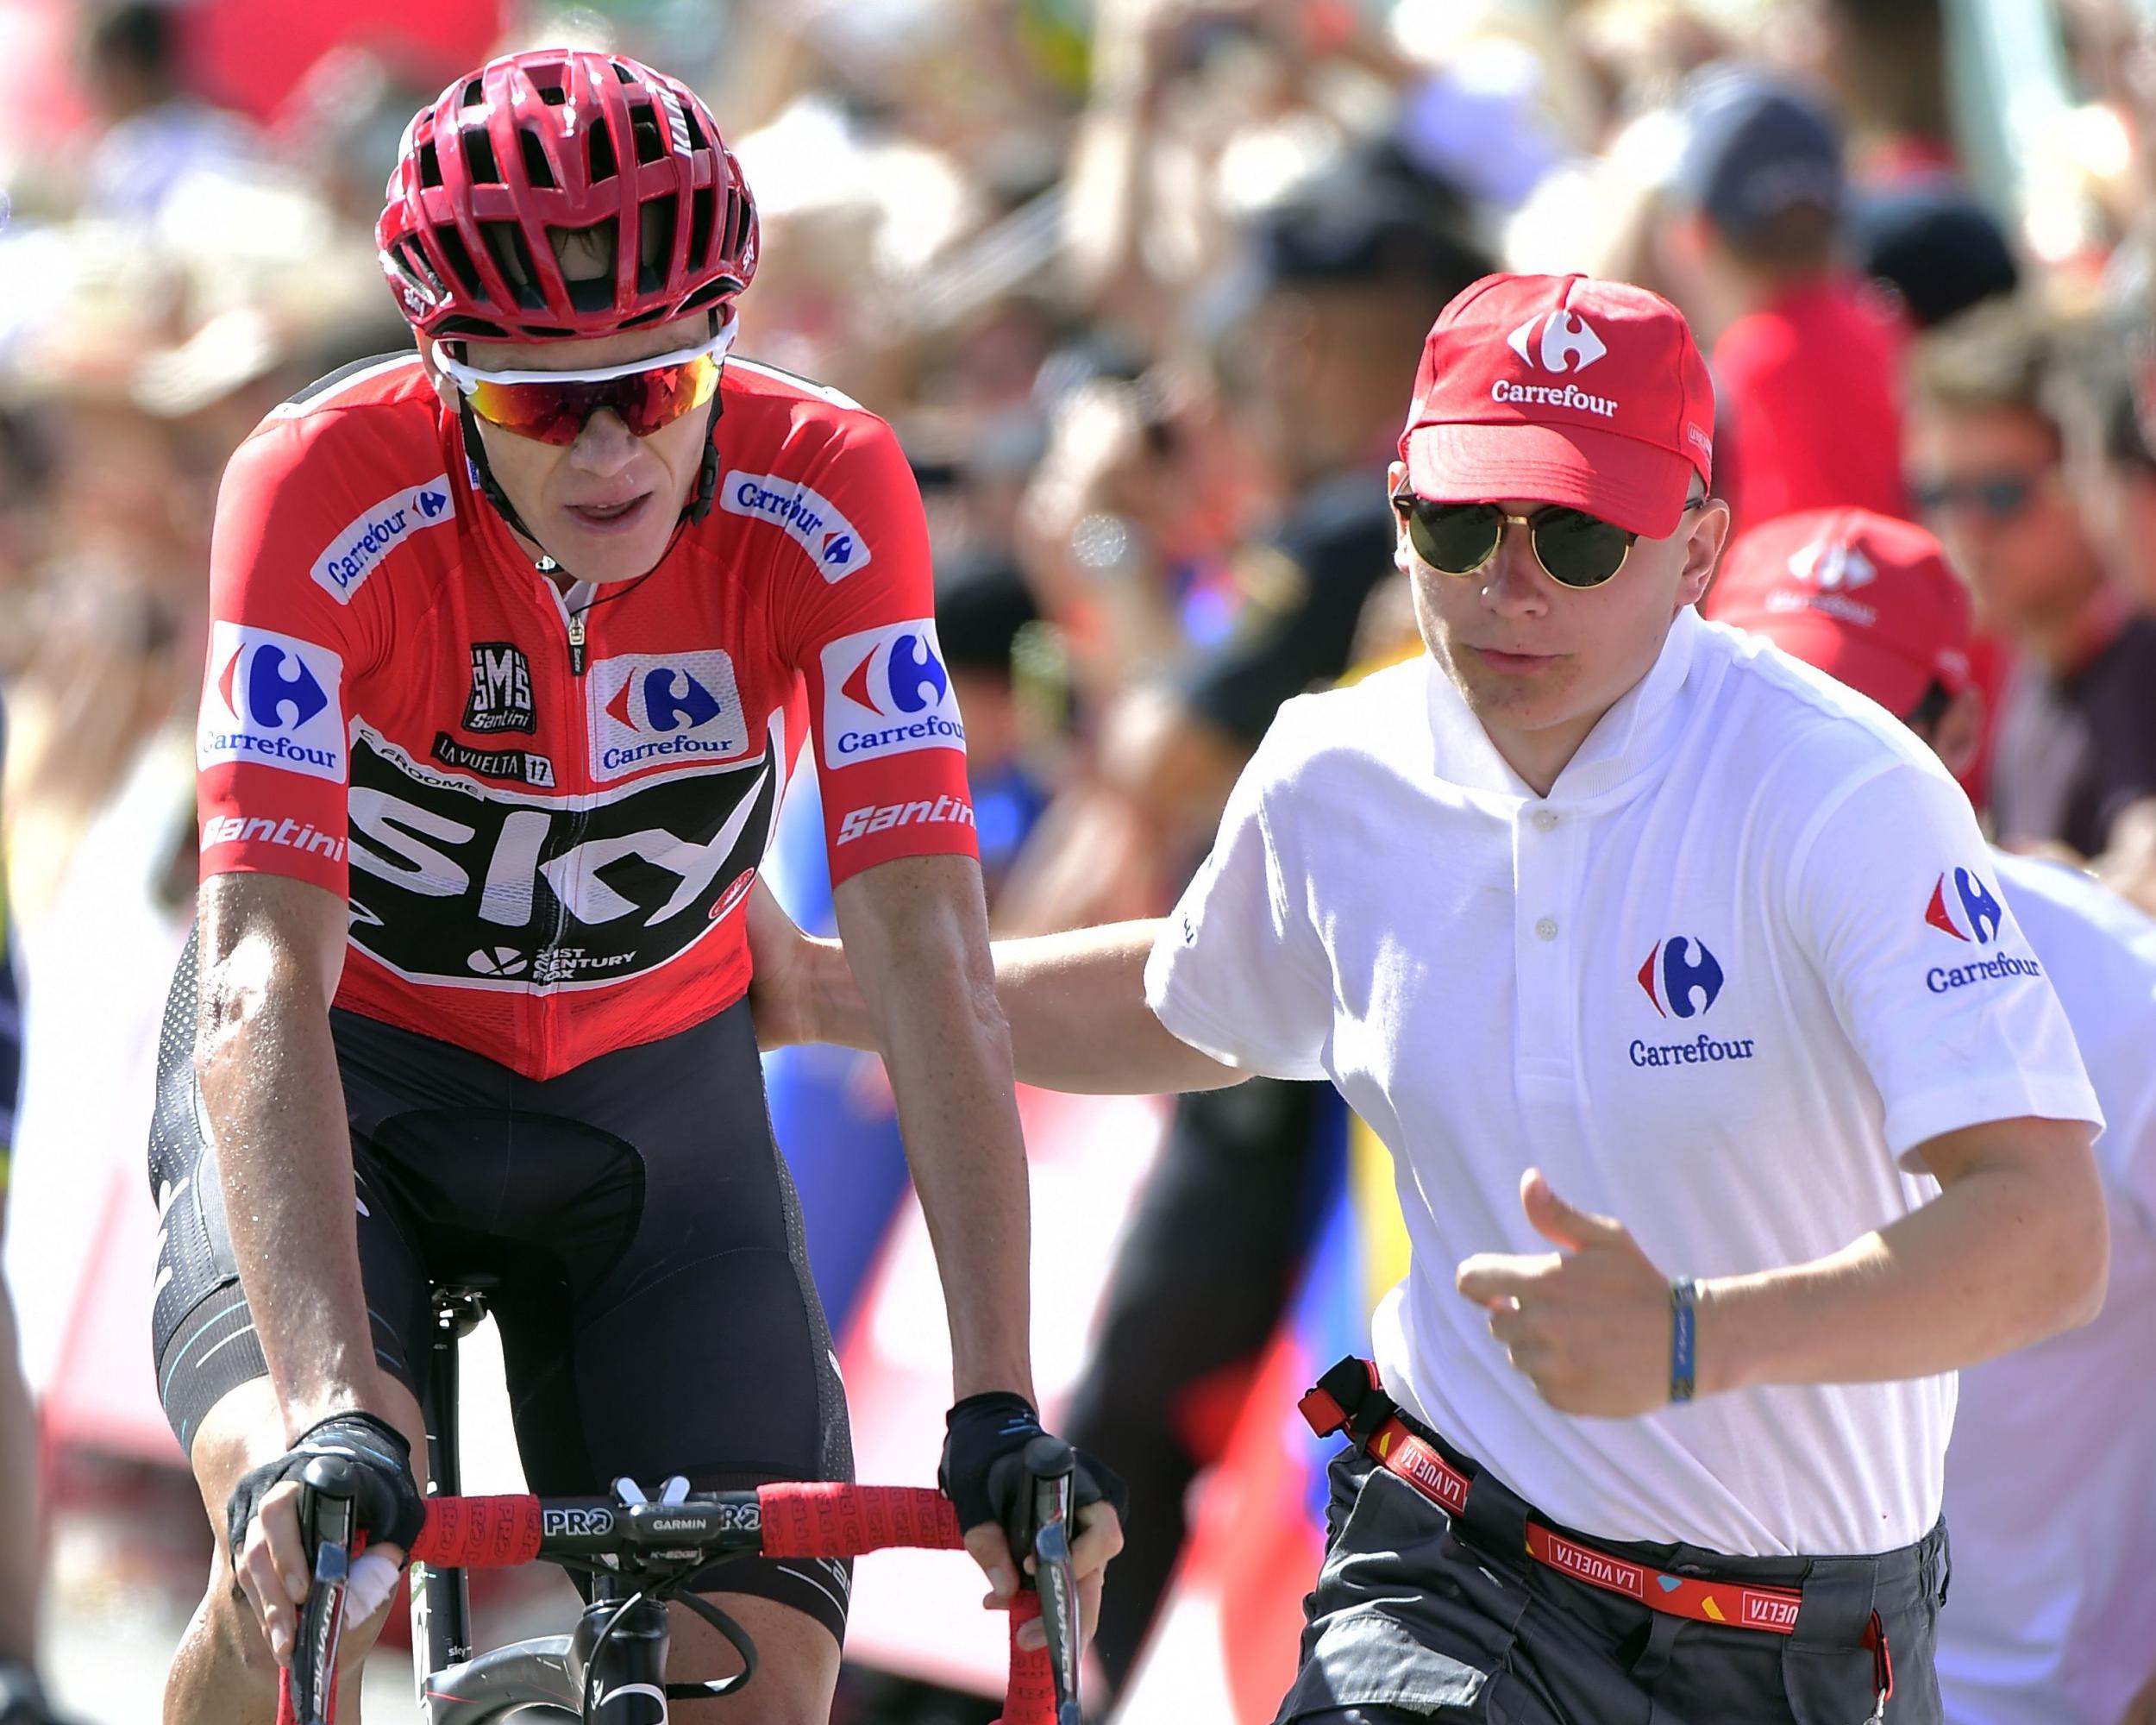 Chris Froome could become the first rider in 39 years to win the Tour de France and La Vuelta in the same season